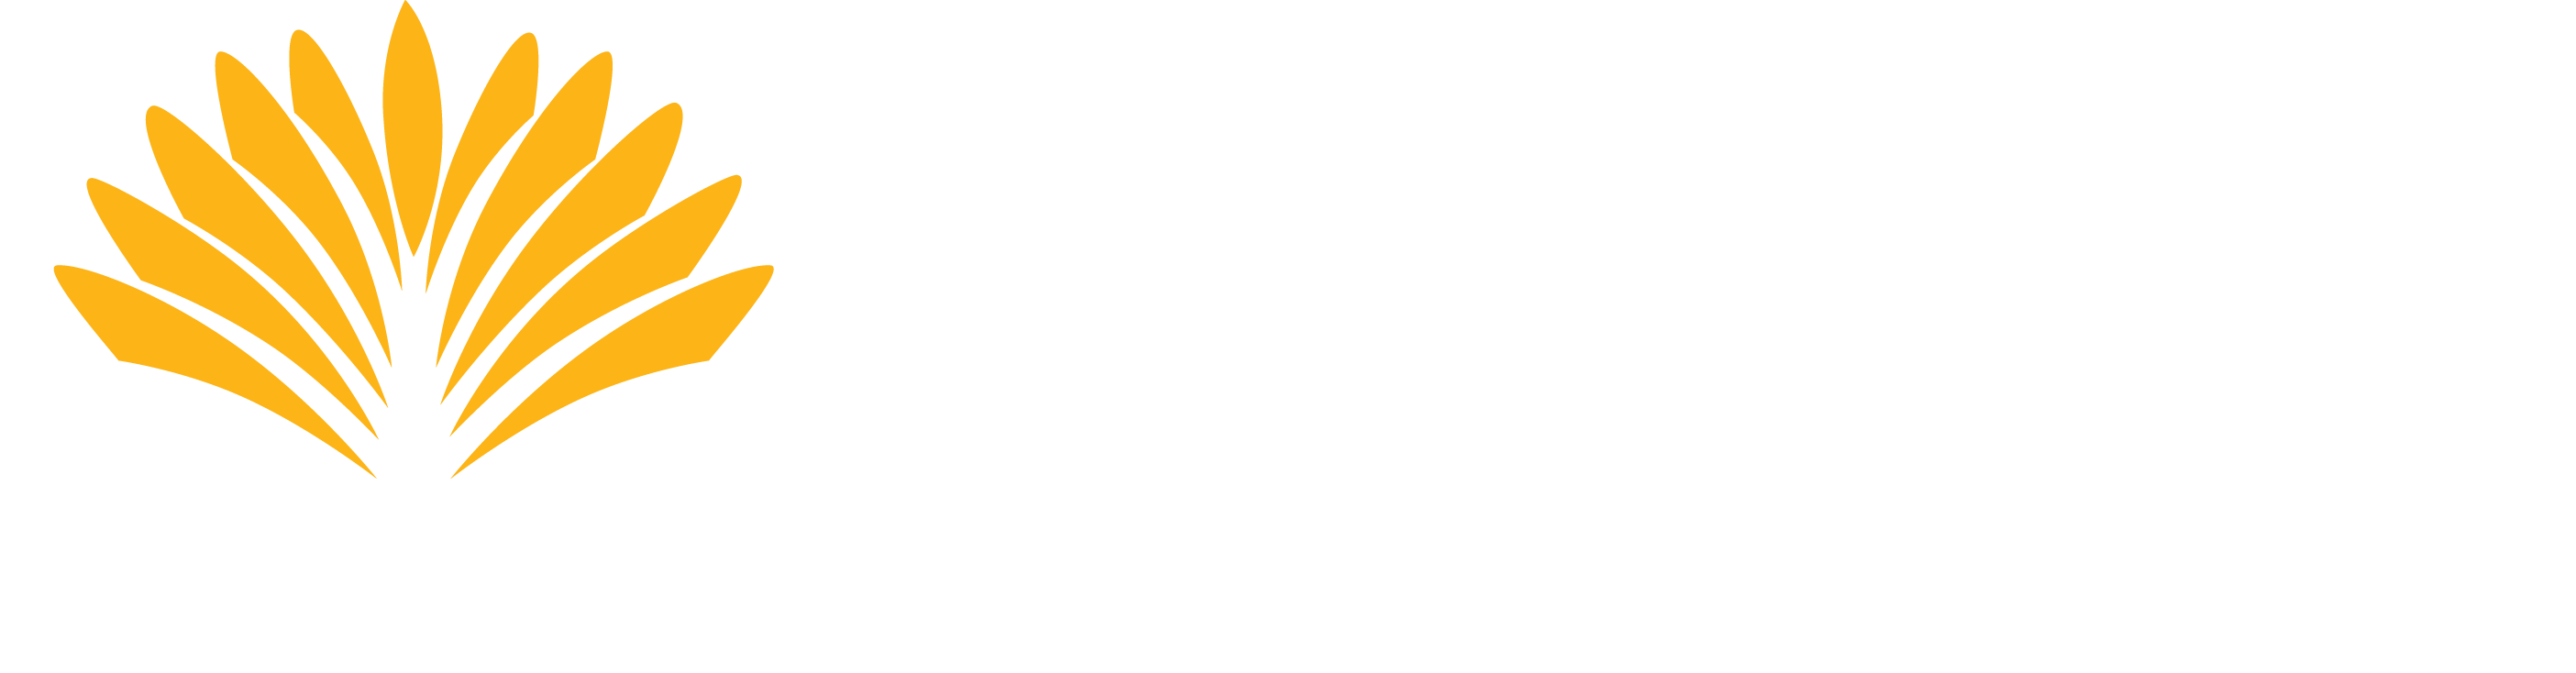 Association of Recovery in Higher Education: ARHE